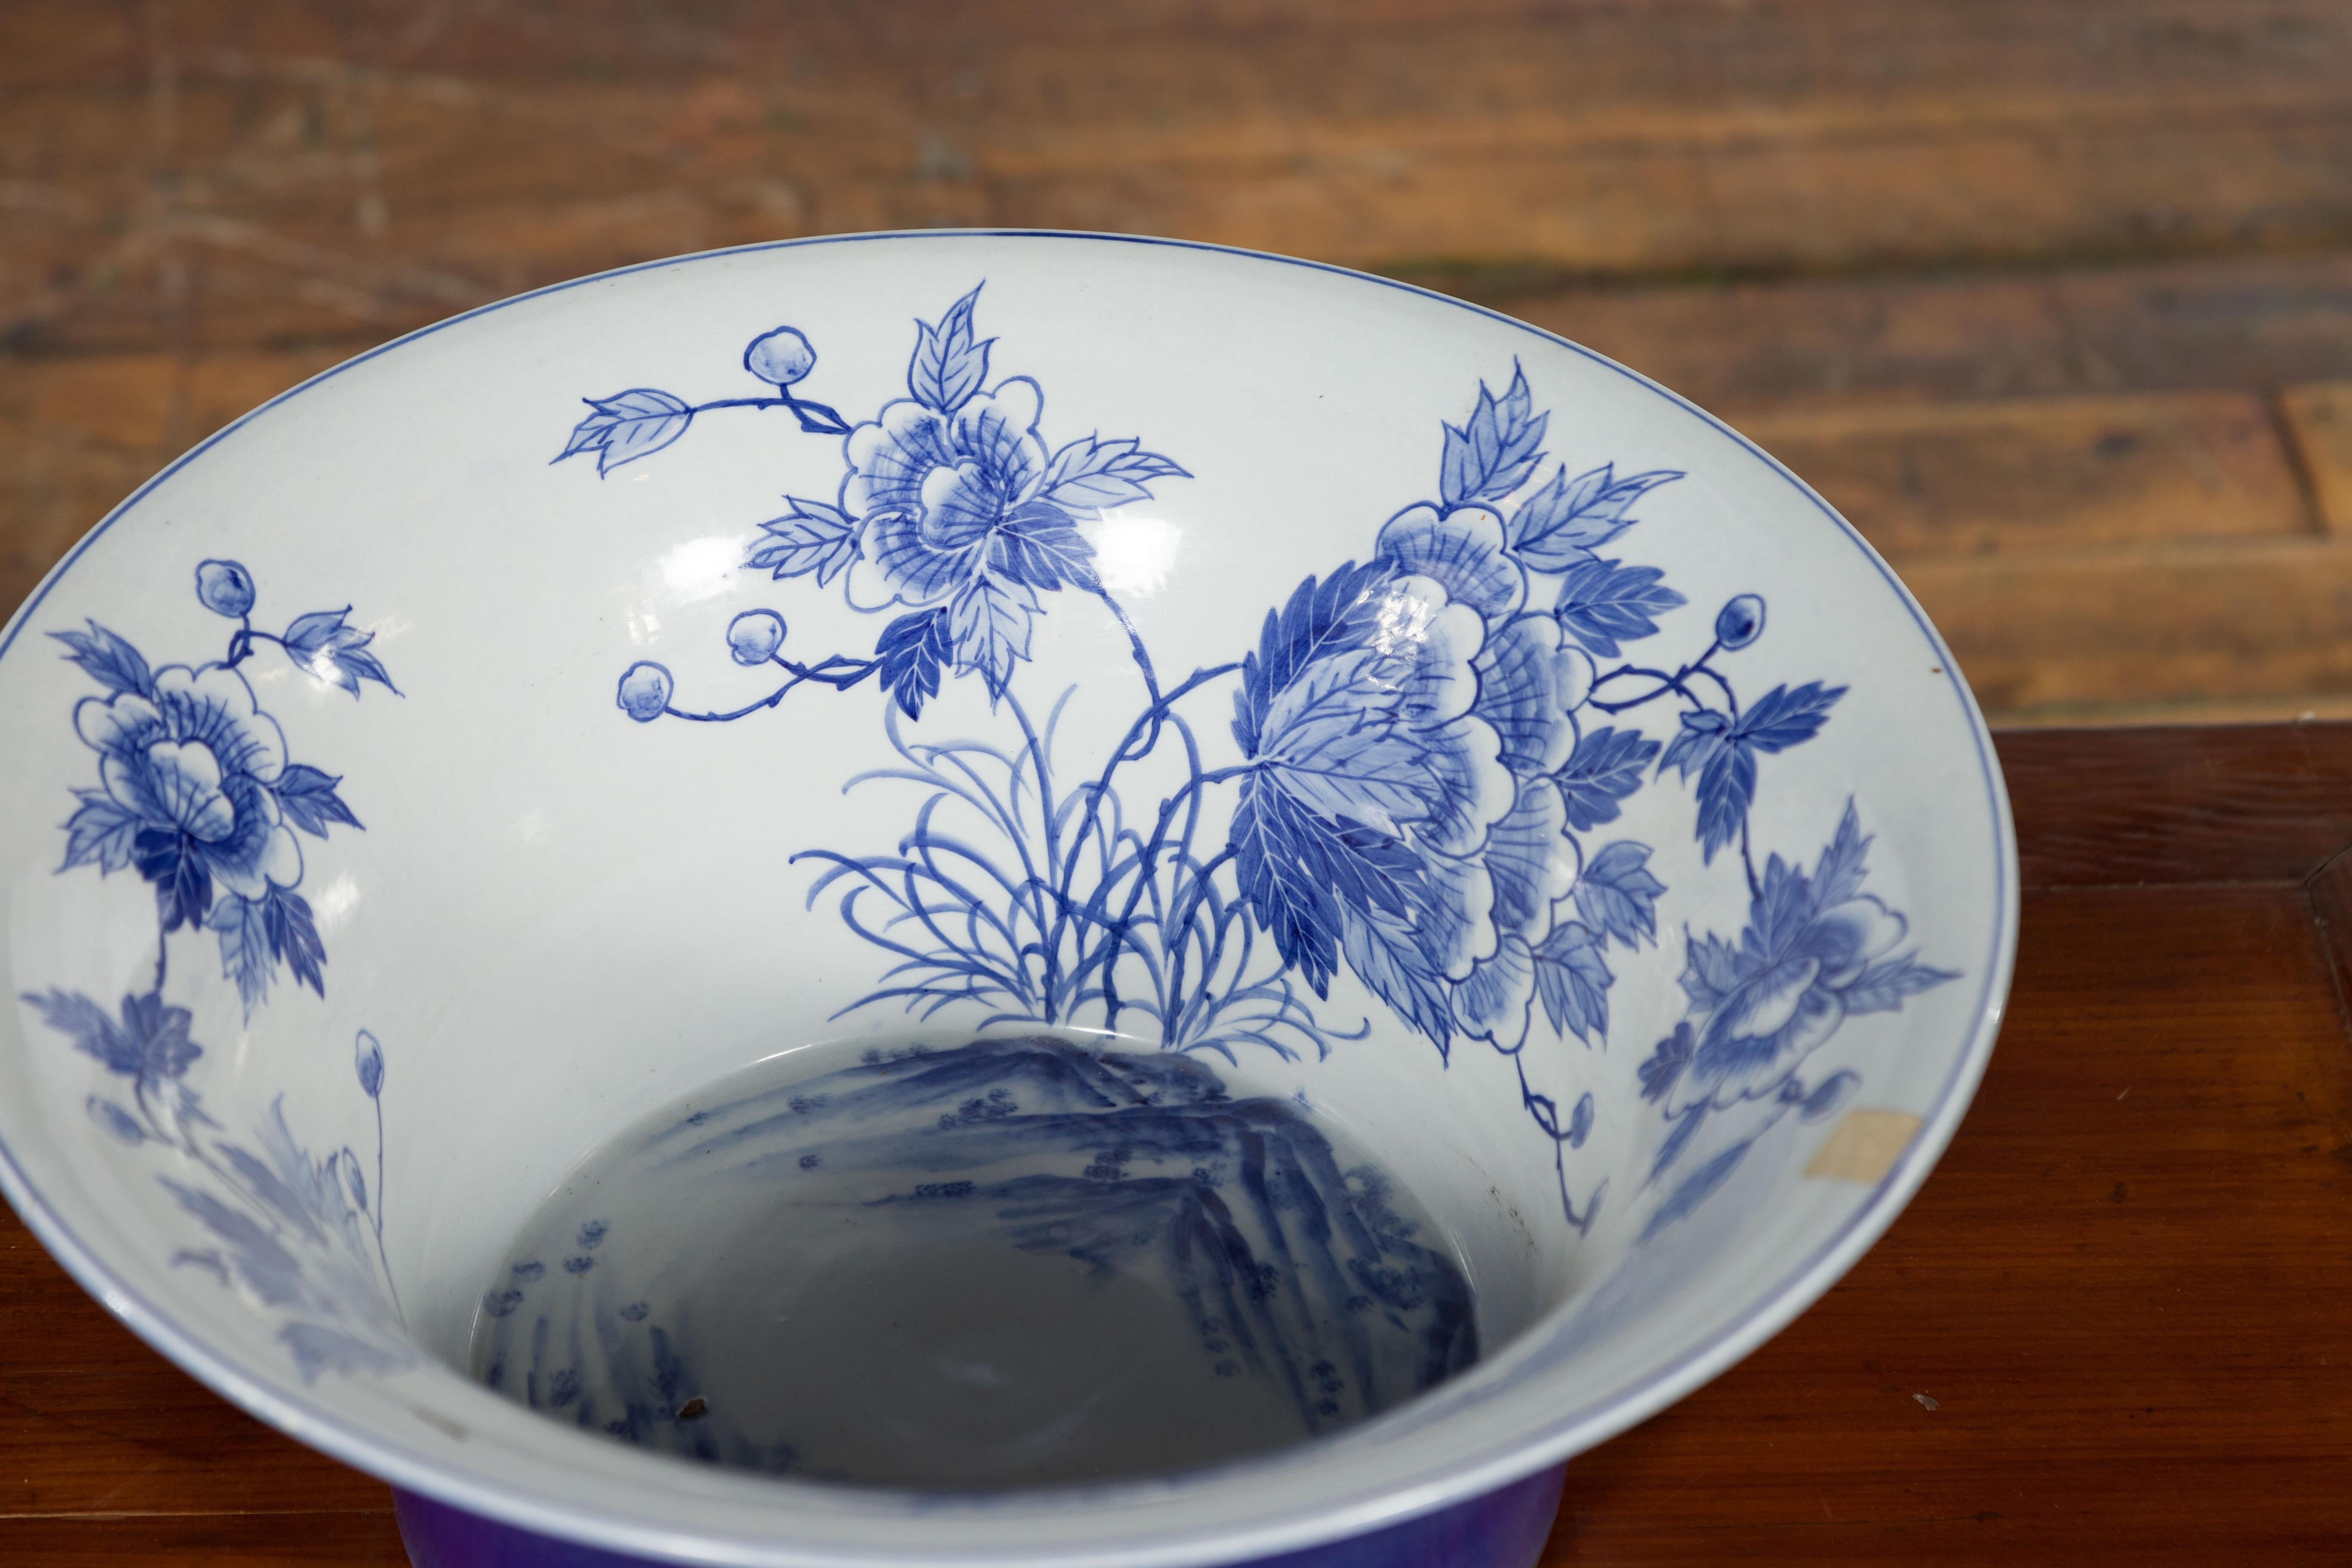 Chinese Blue and White Porcelain Wash Basin with Floral Motifs and Cobalt Blue For Sale 2